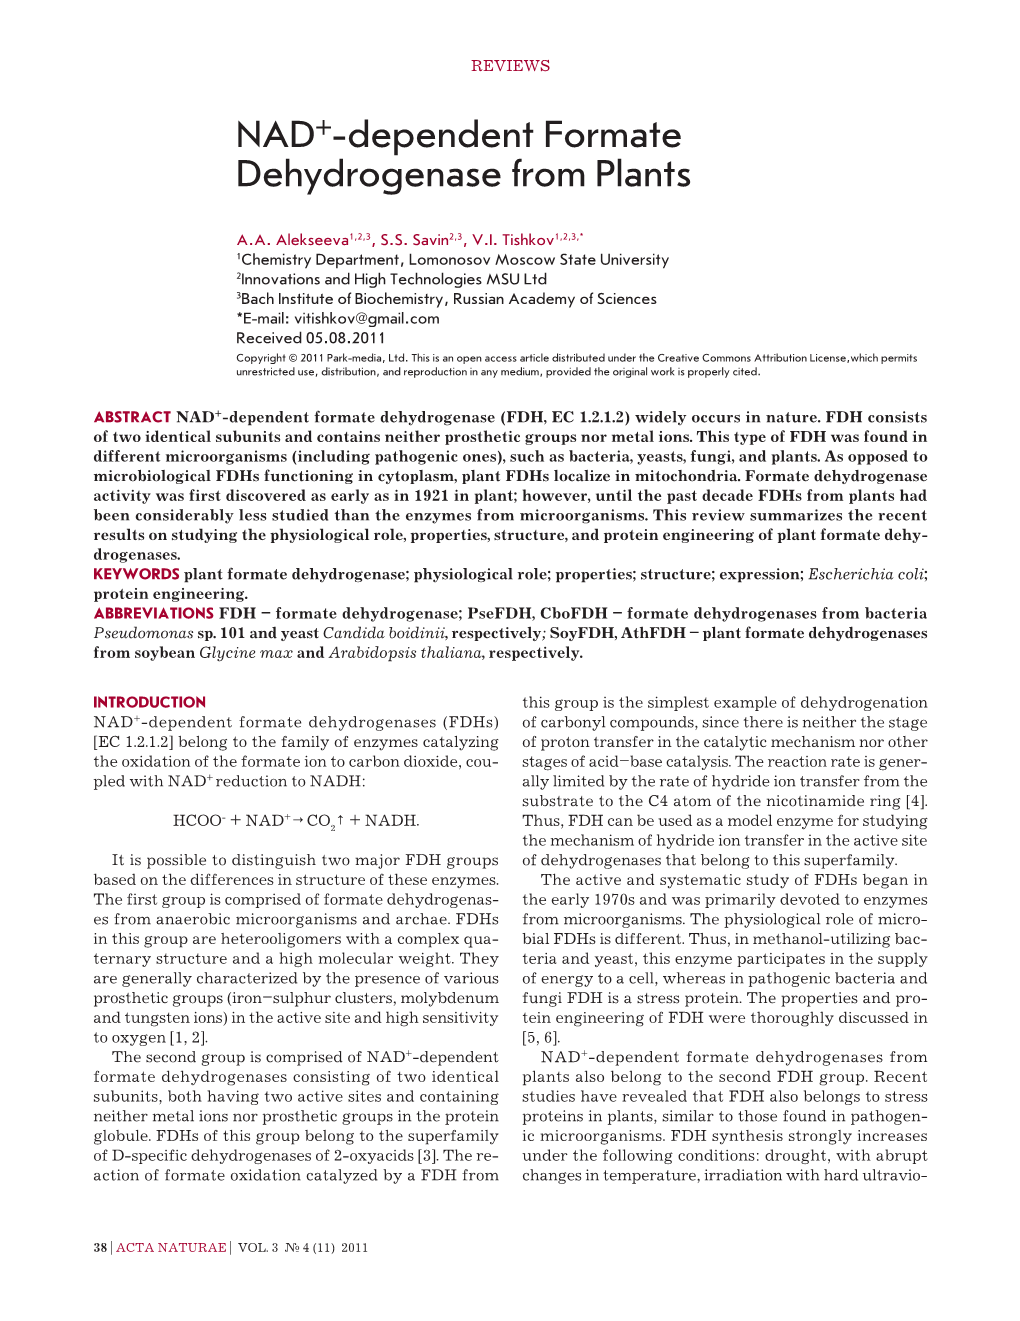 NAD+-Dependent Formate Dehydrogenase from Plants